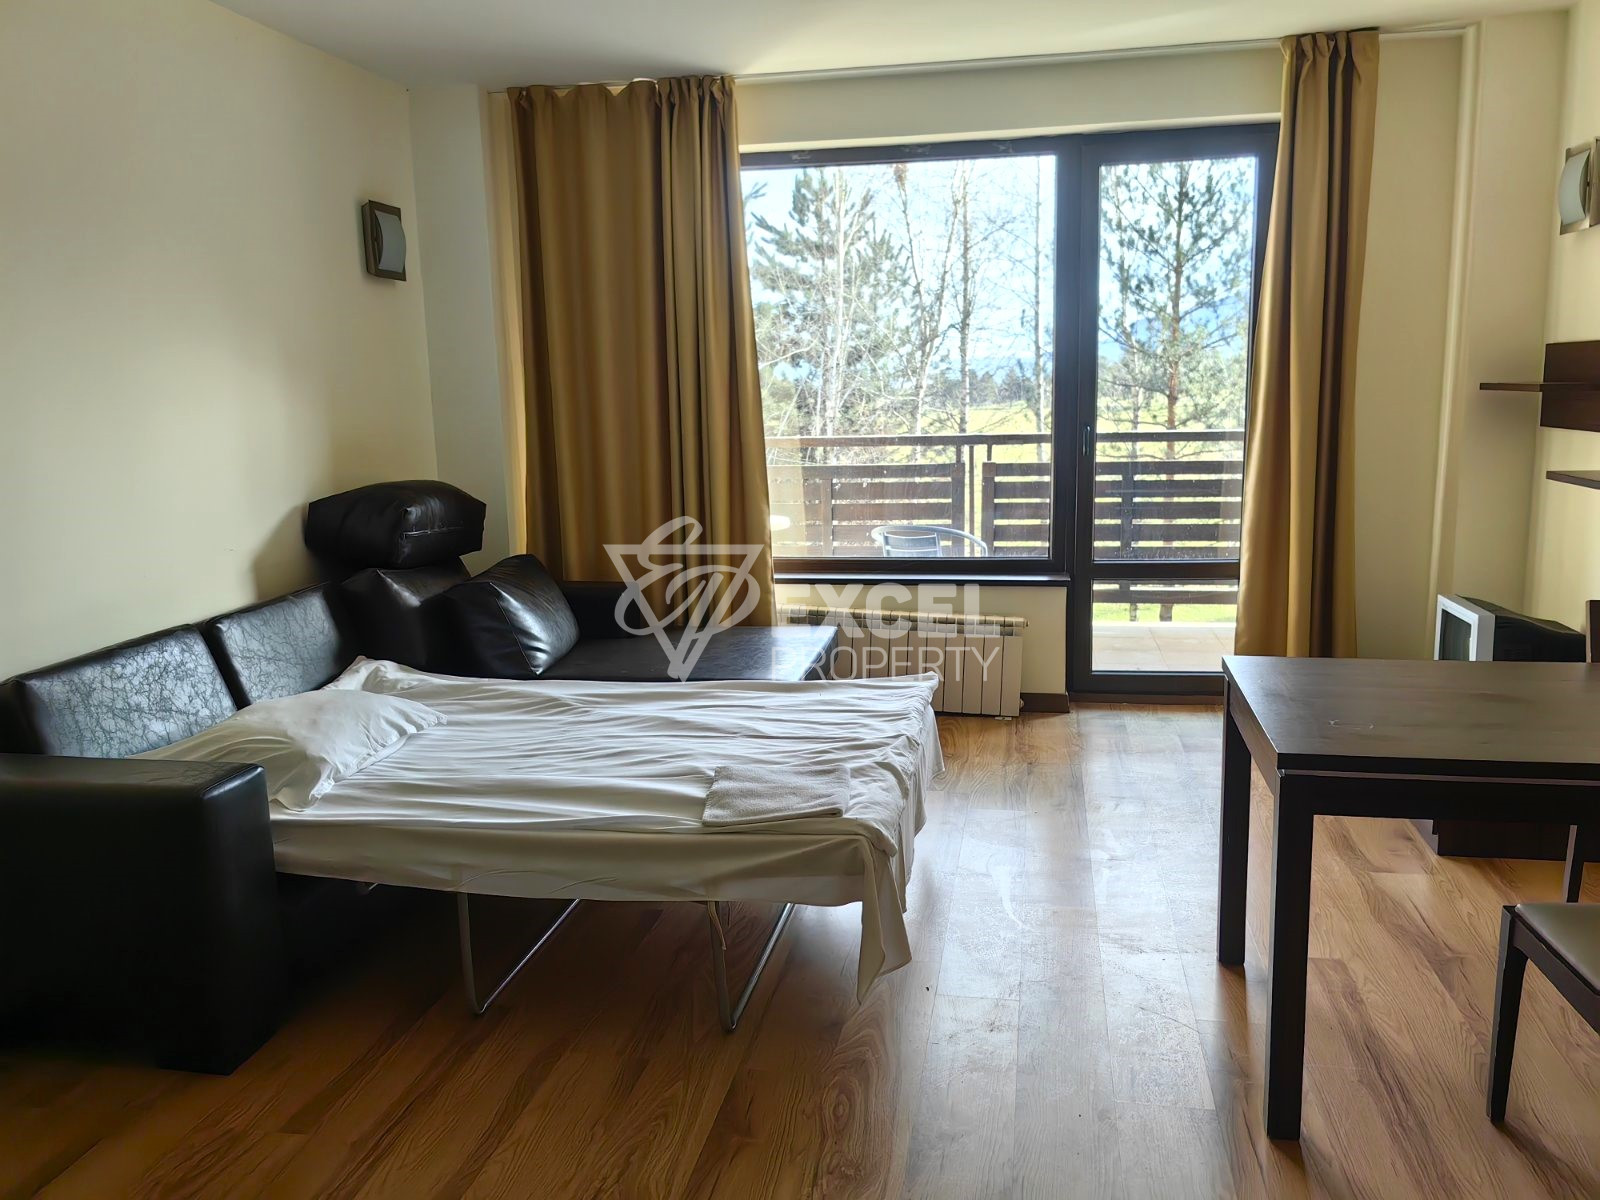 Exclusive property for sale: Two-bedroom apartment with a magnificent view of the Pirin peaks